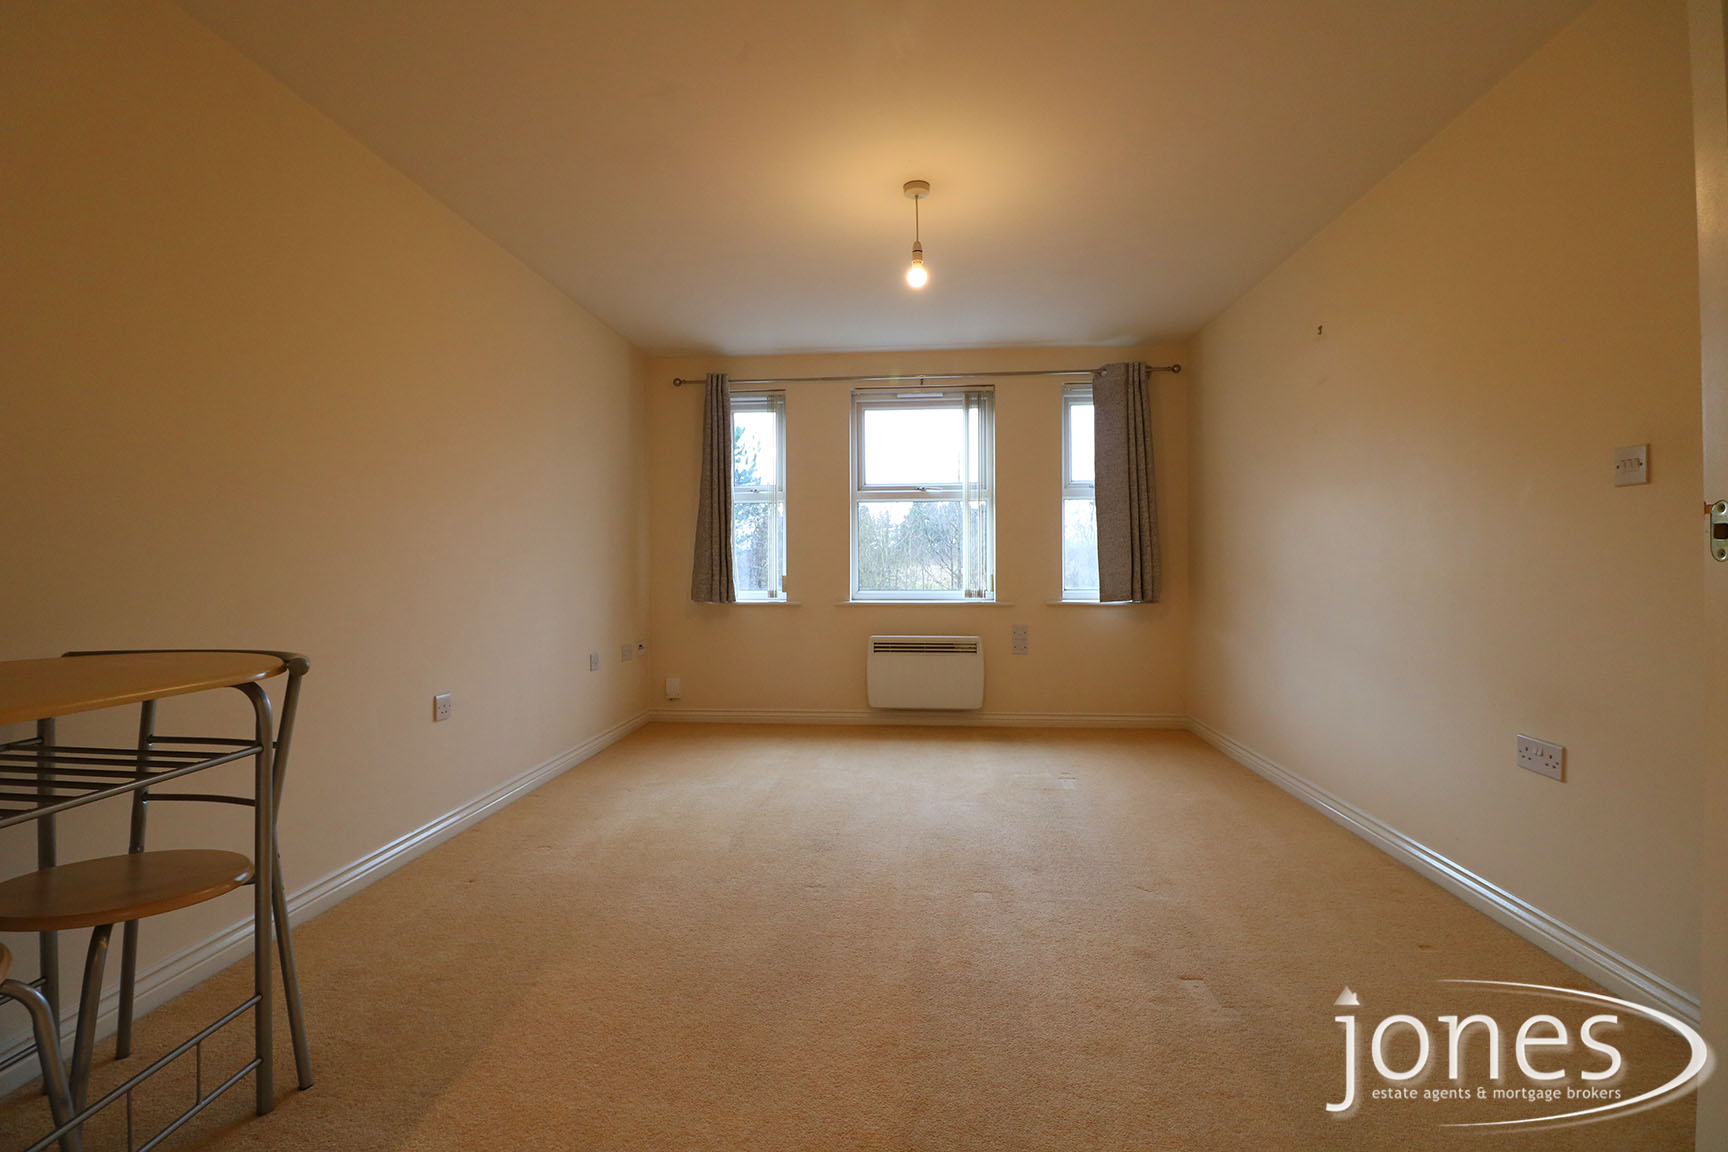 Home for Sale Let - Photo 02 Lowther Drive, Darlington, DL1 4LZ